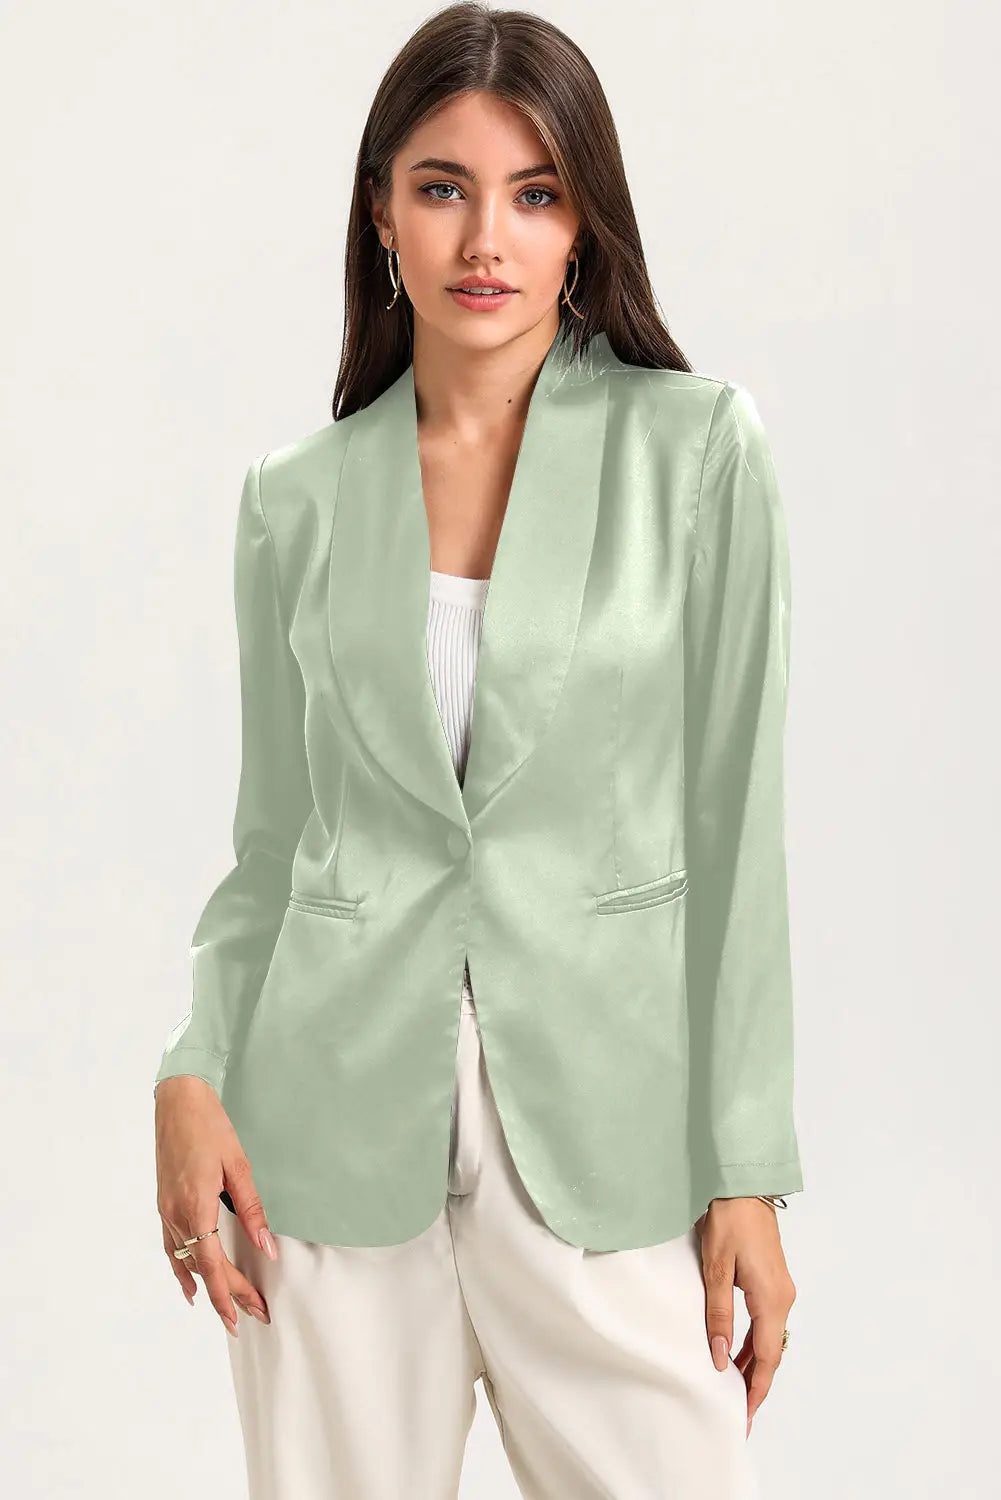 Black collared neck single breasted blazer with pockets - green / s / 90% polyester + 10% elastane - blazers